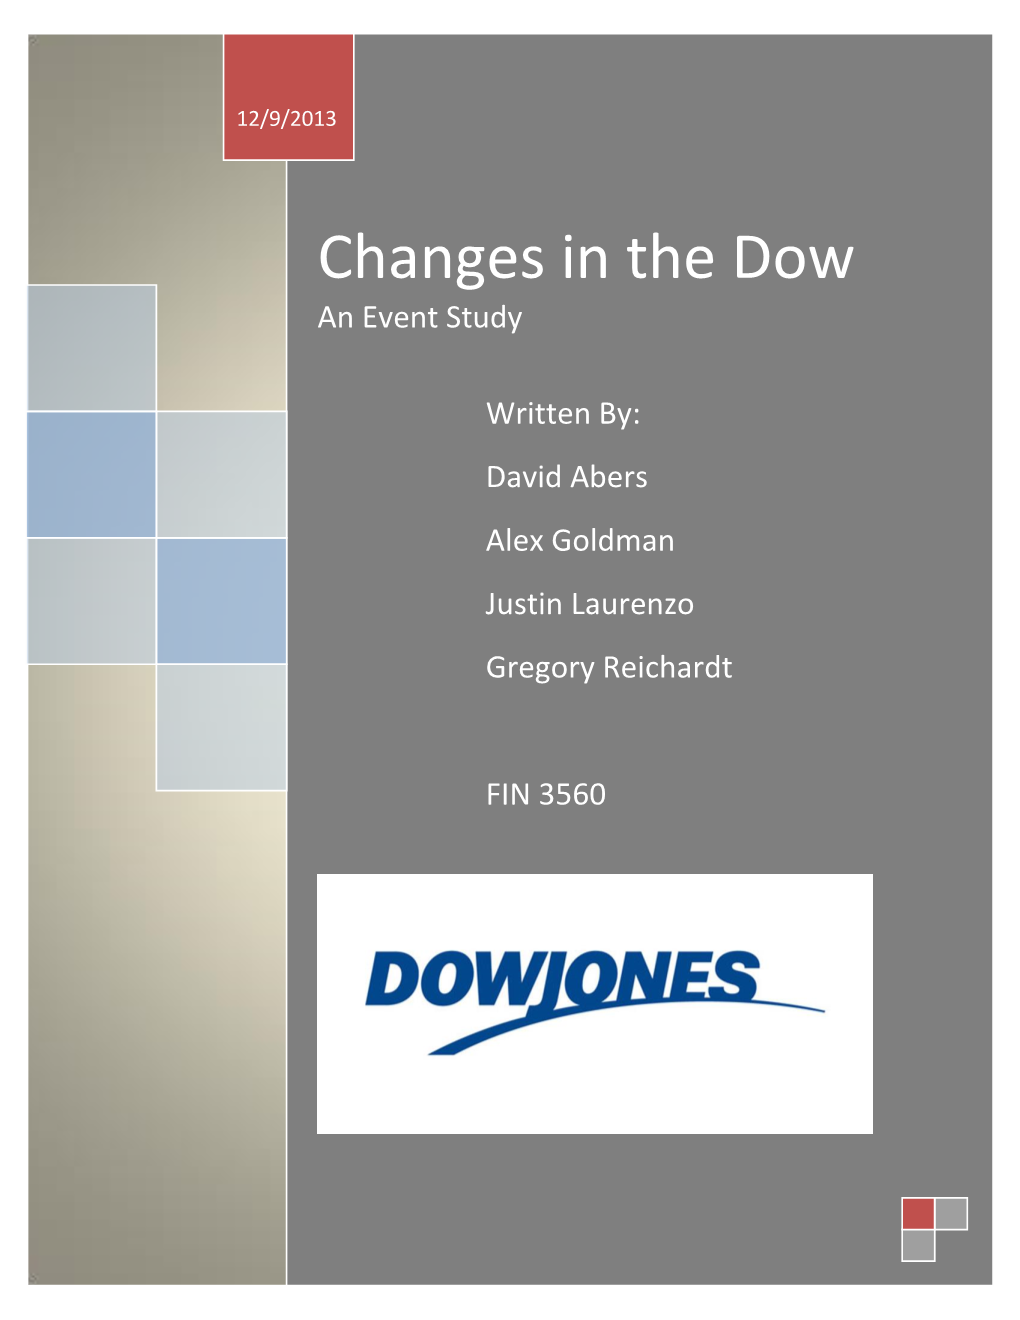 Changes in the Dow an Event Study